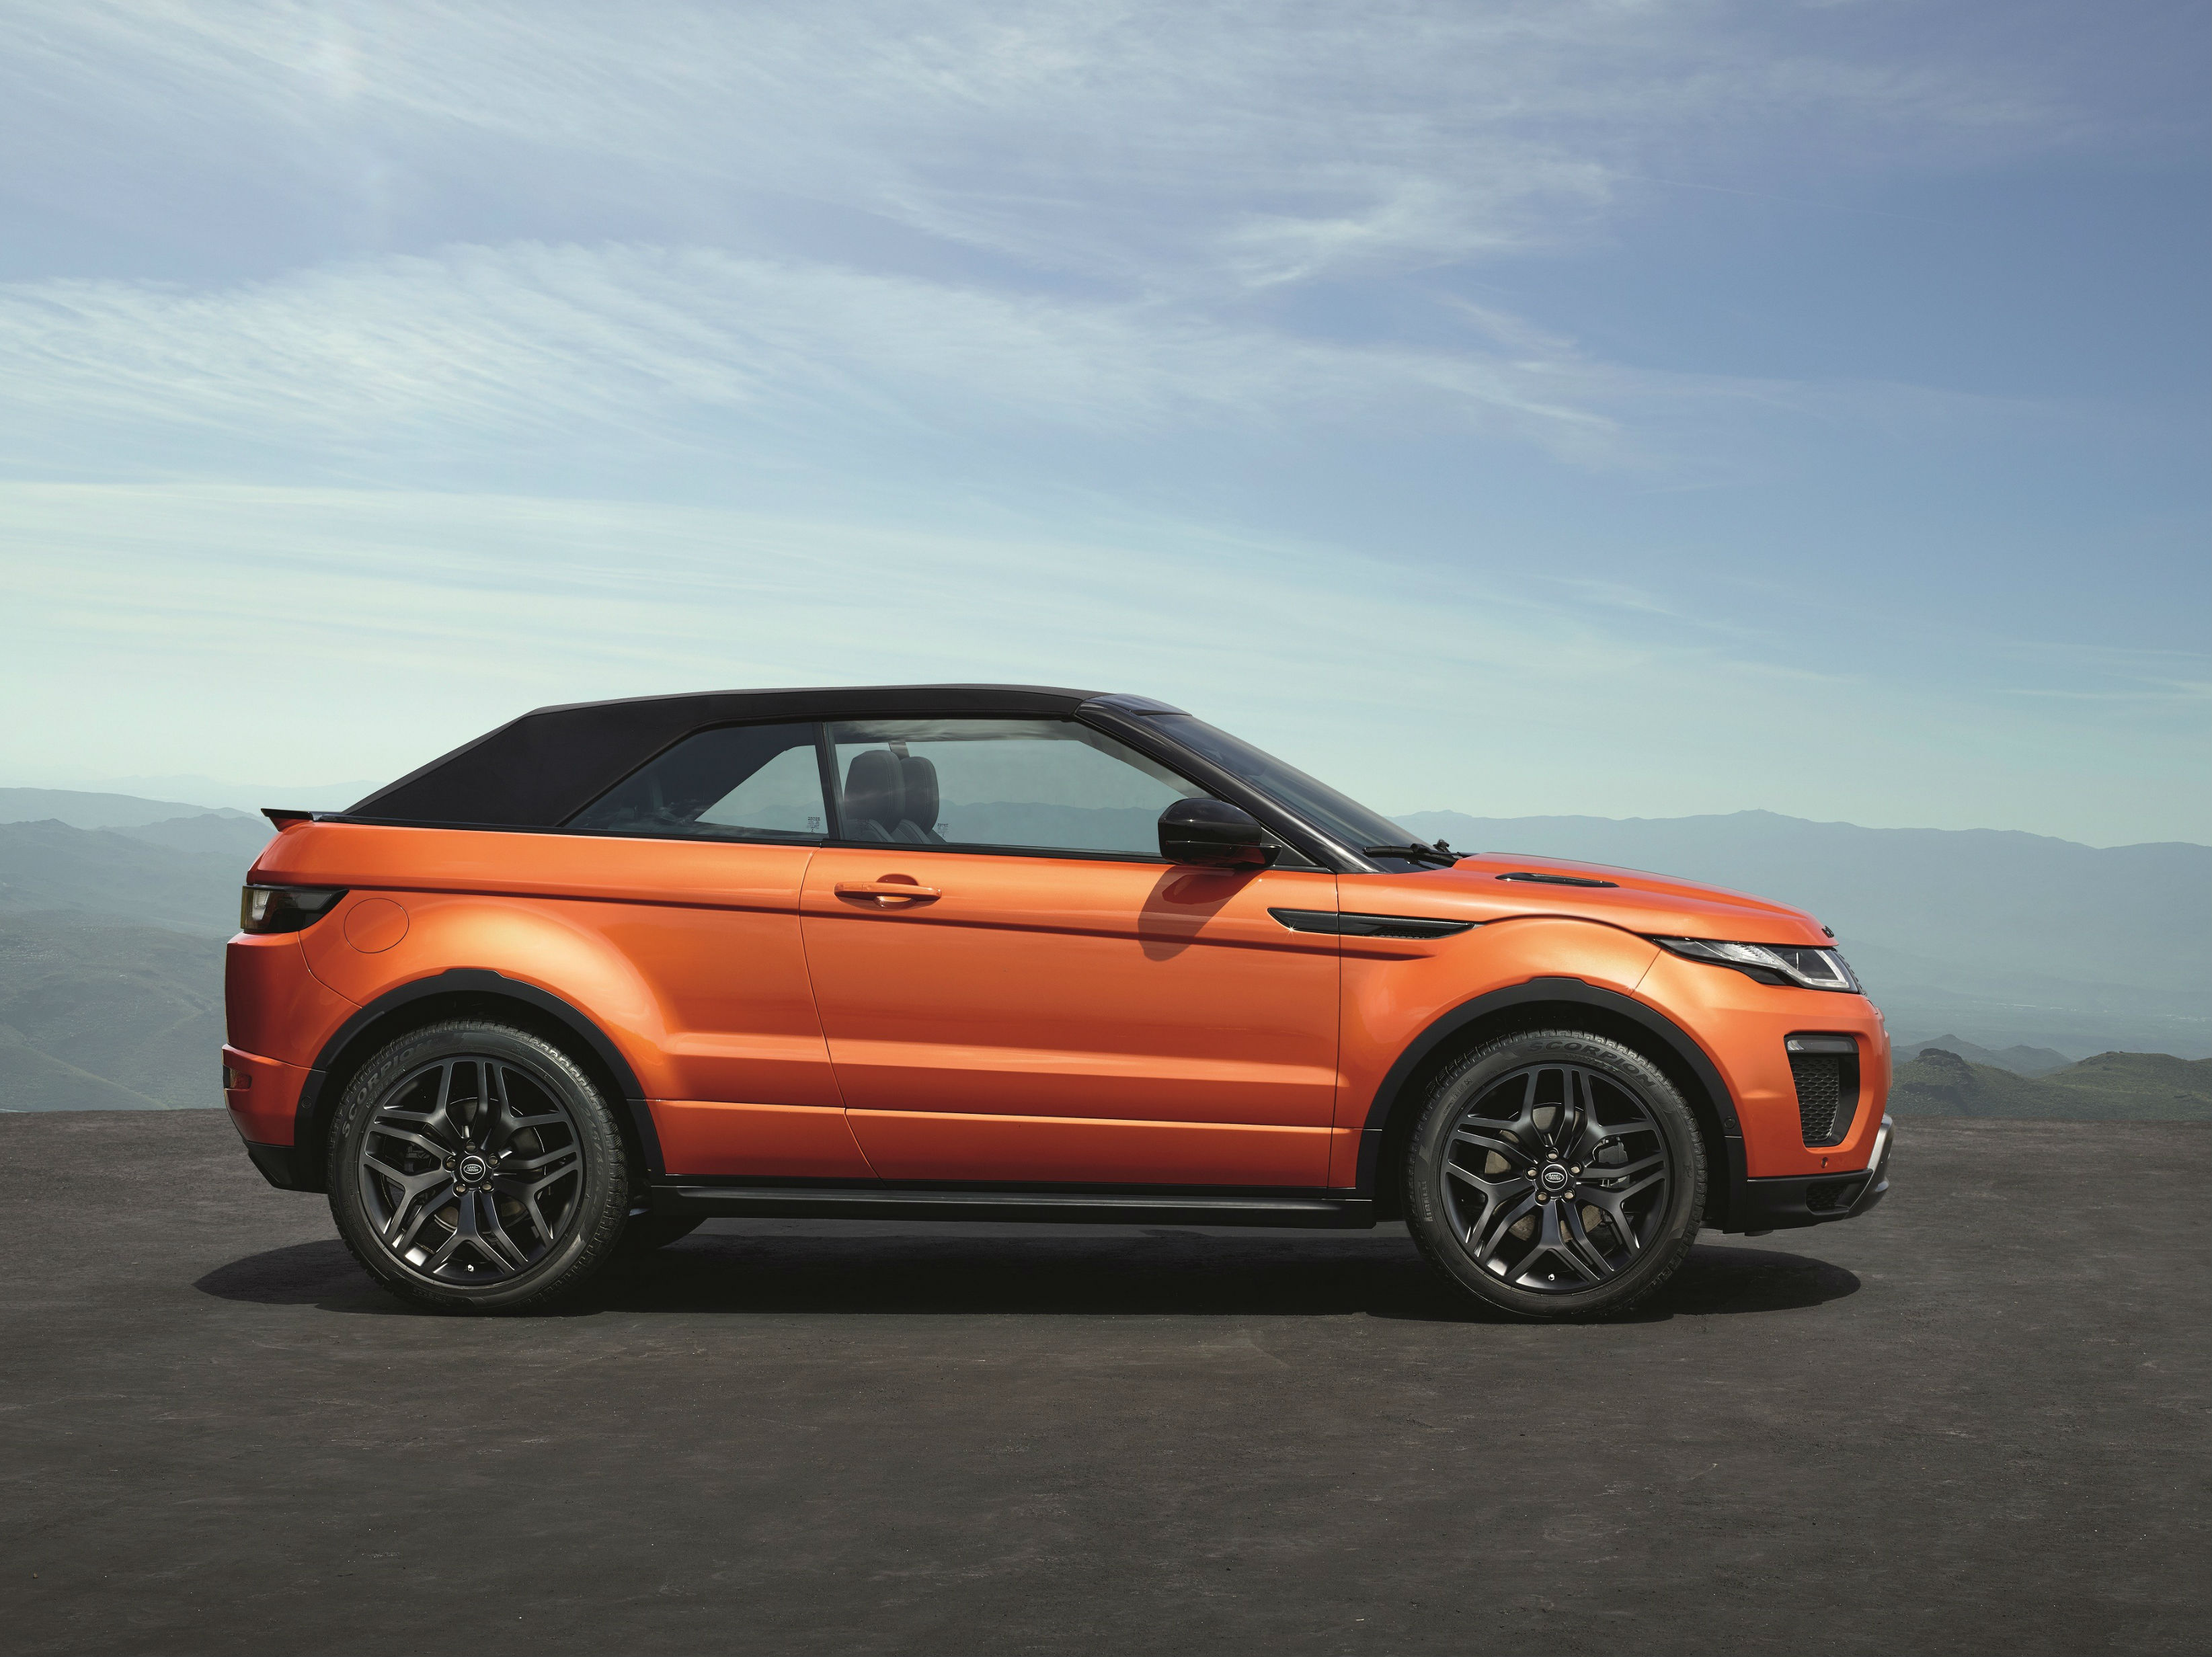 Land Rover Range Rover Evoque Convertible mod restyling